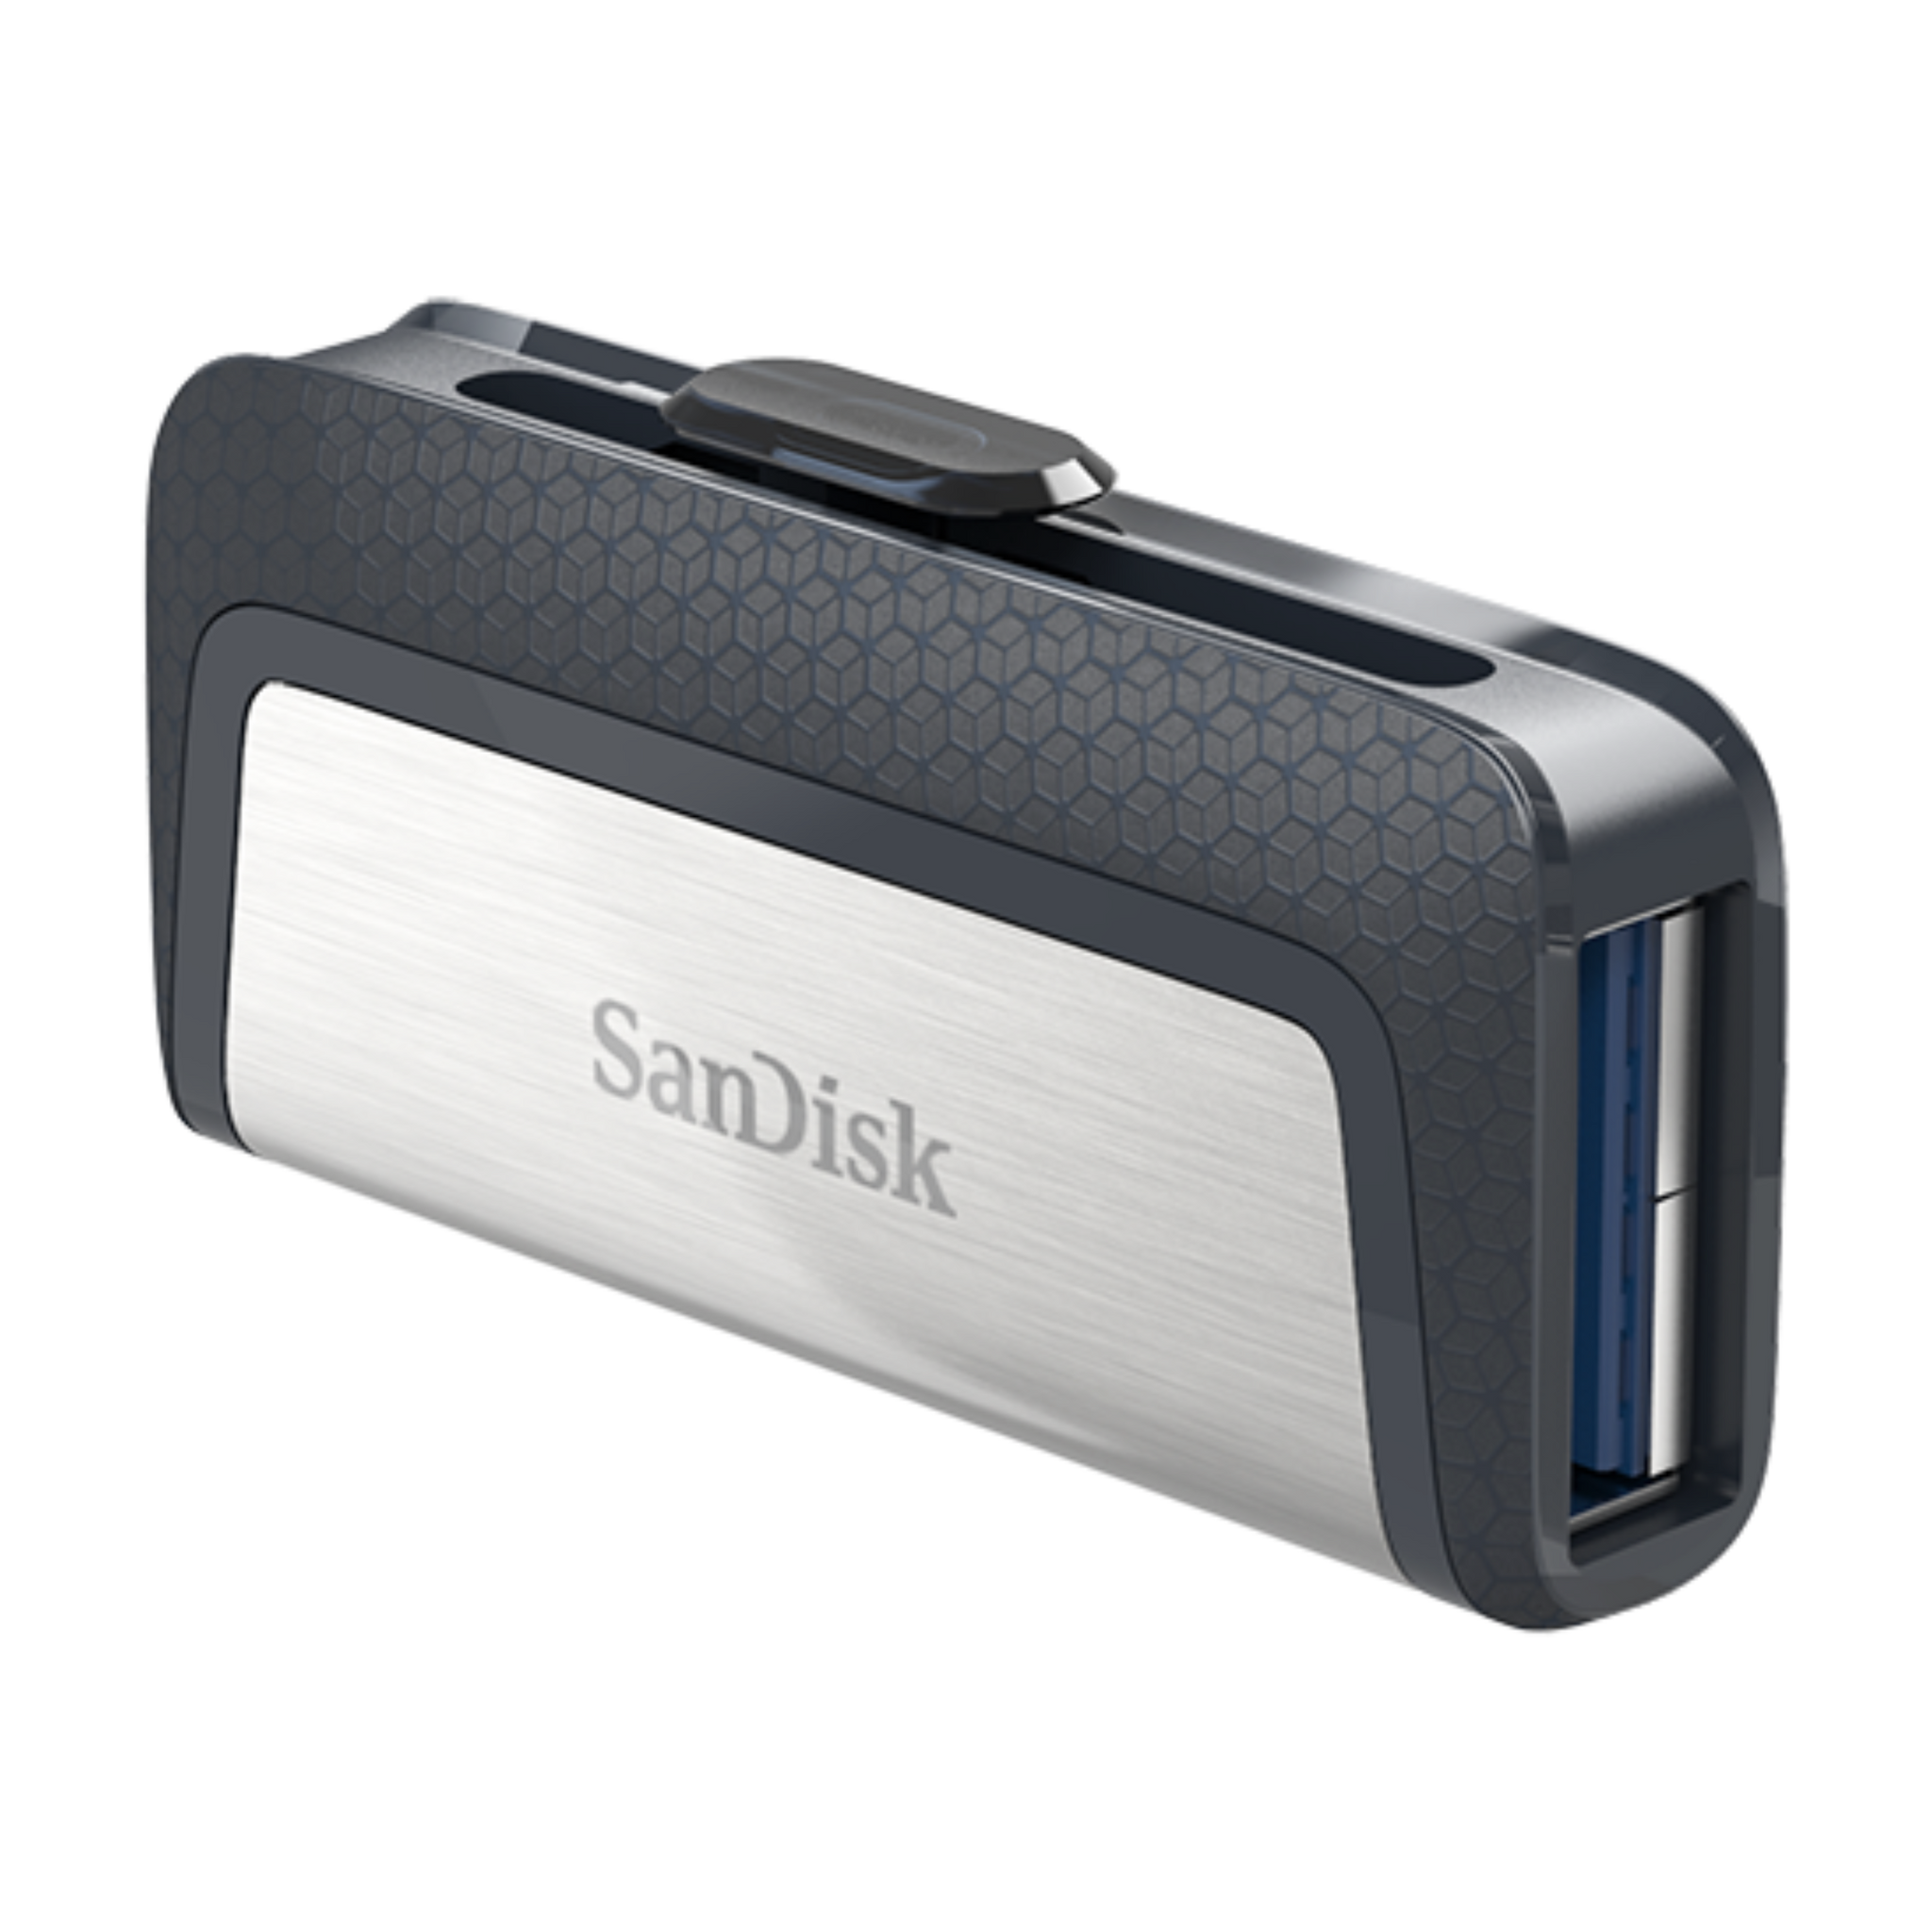 SanDisk Ultra Dual Flash Drive Type-C USB 3.1 OTG for Android Smartphone, Computers & Tablets-Data Storage-futuromic